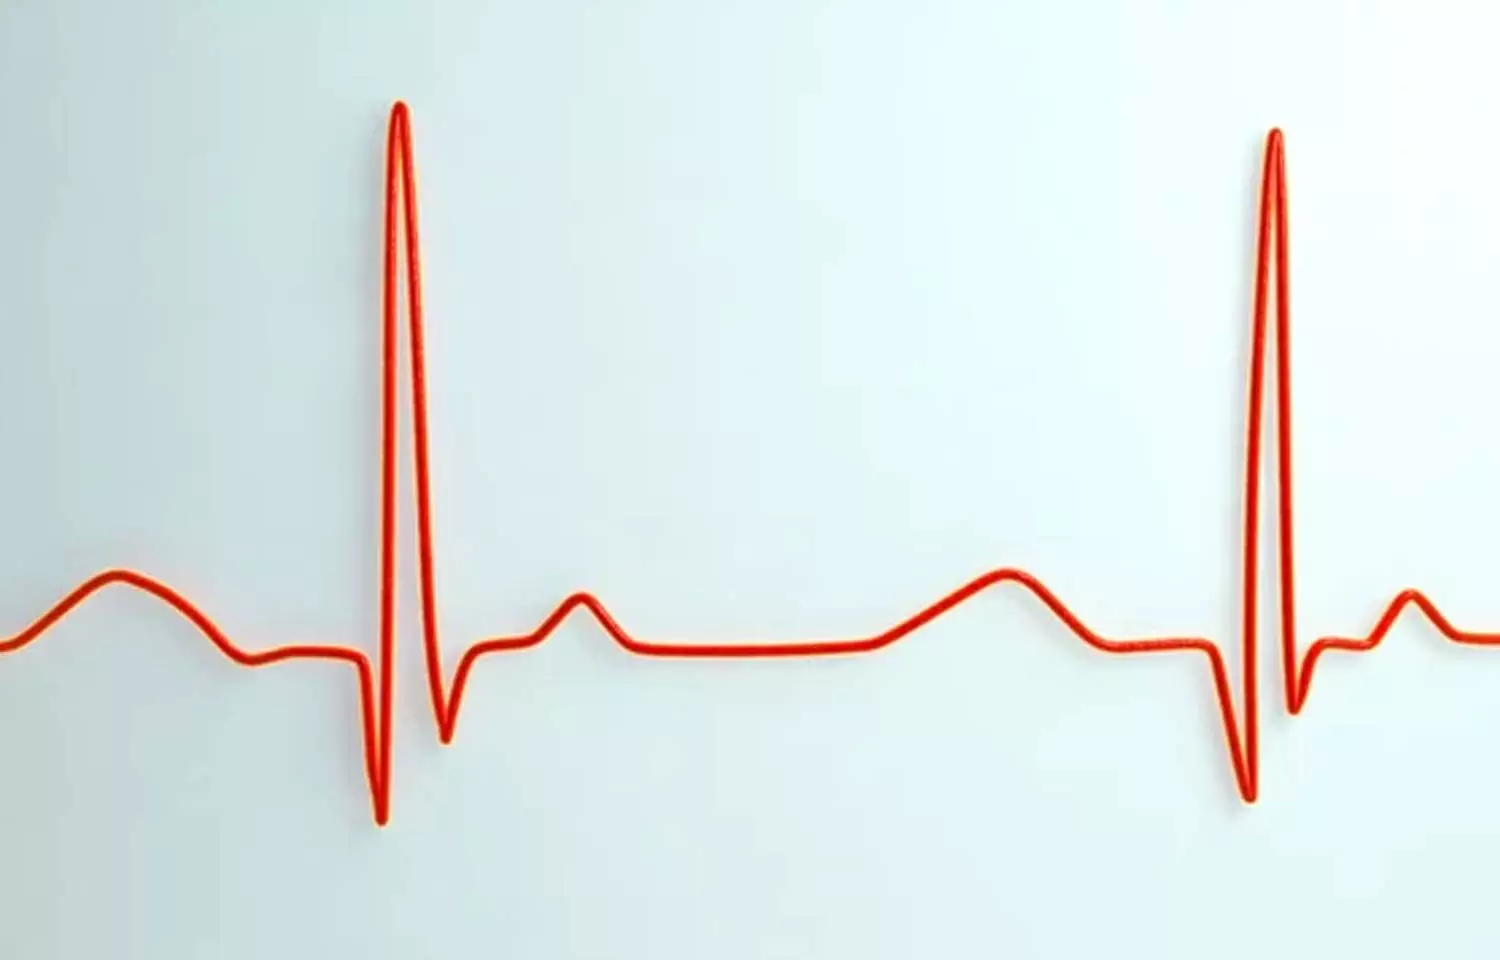 Rapid declines of resting heart rate after childhood predict CVD, finds study